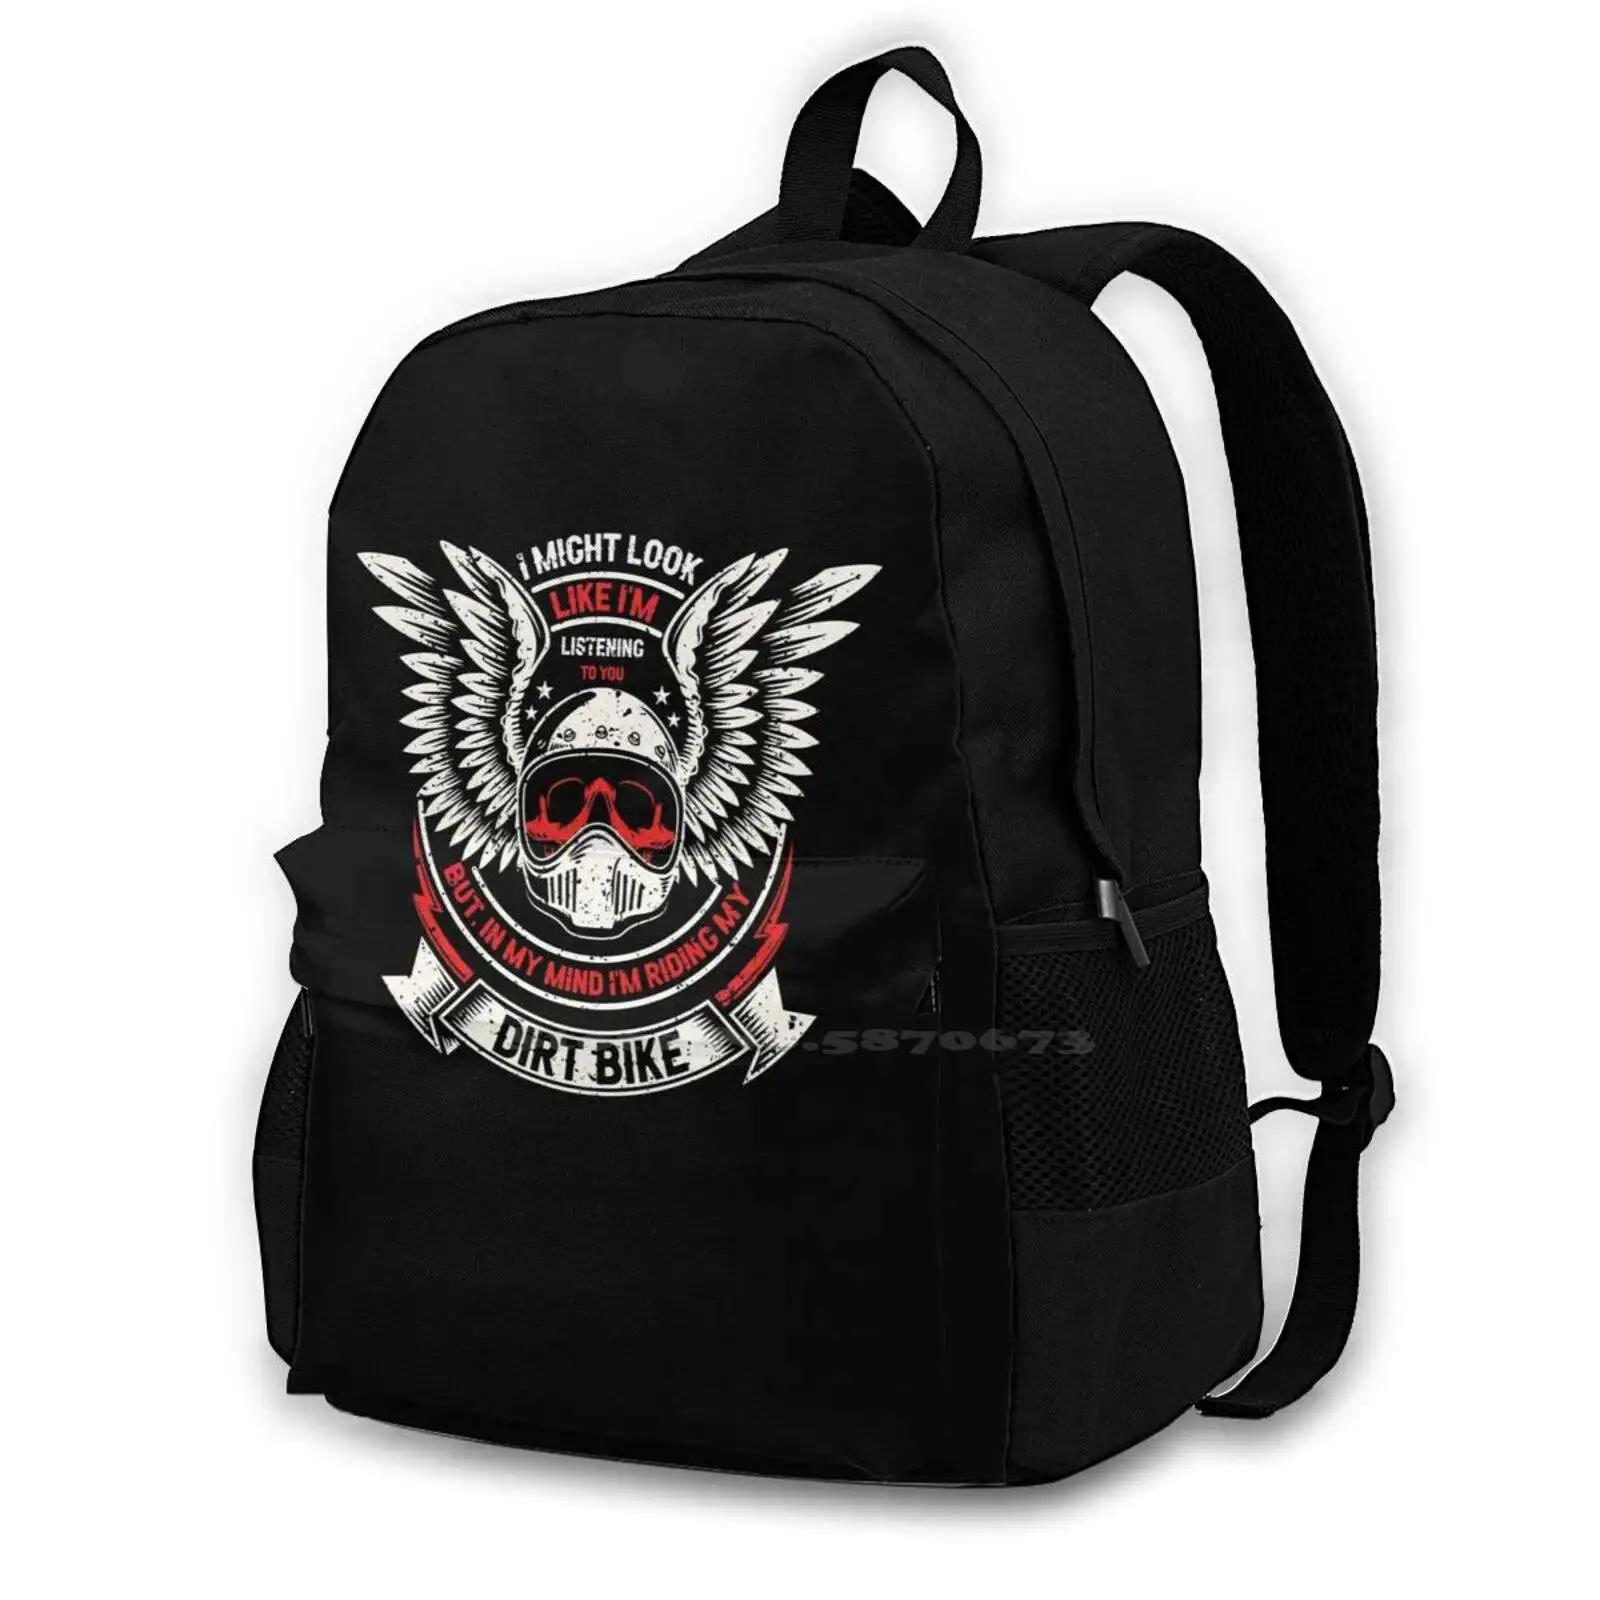 

Forced To Work Fashion Travel Laptop School Backpack Bag Forced To Work Dirt Bike Rider Bike Biker Motorcycle Ride Born Forced